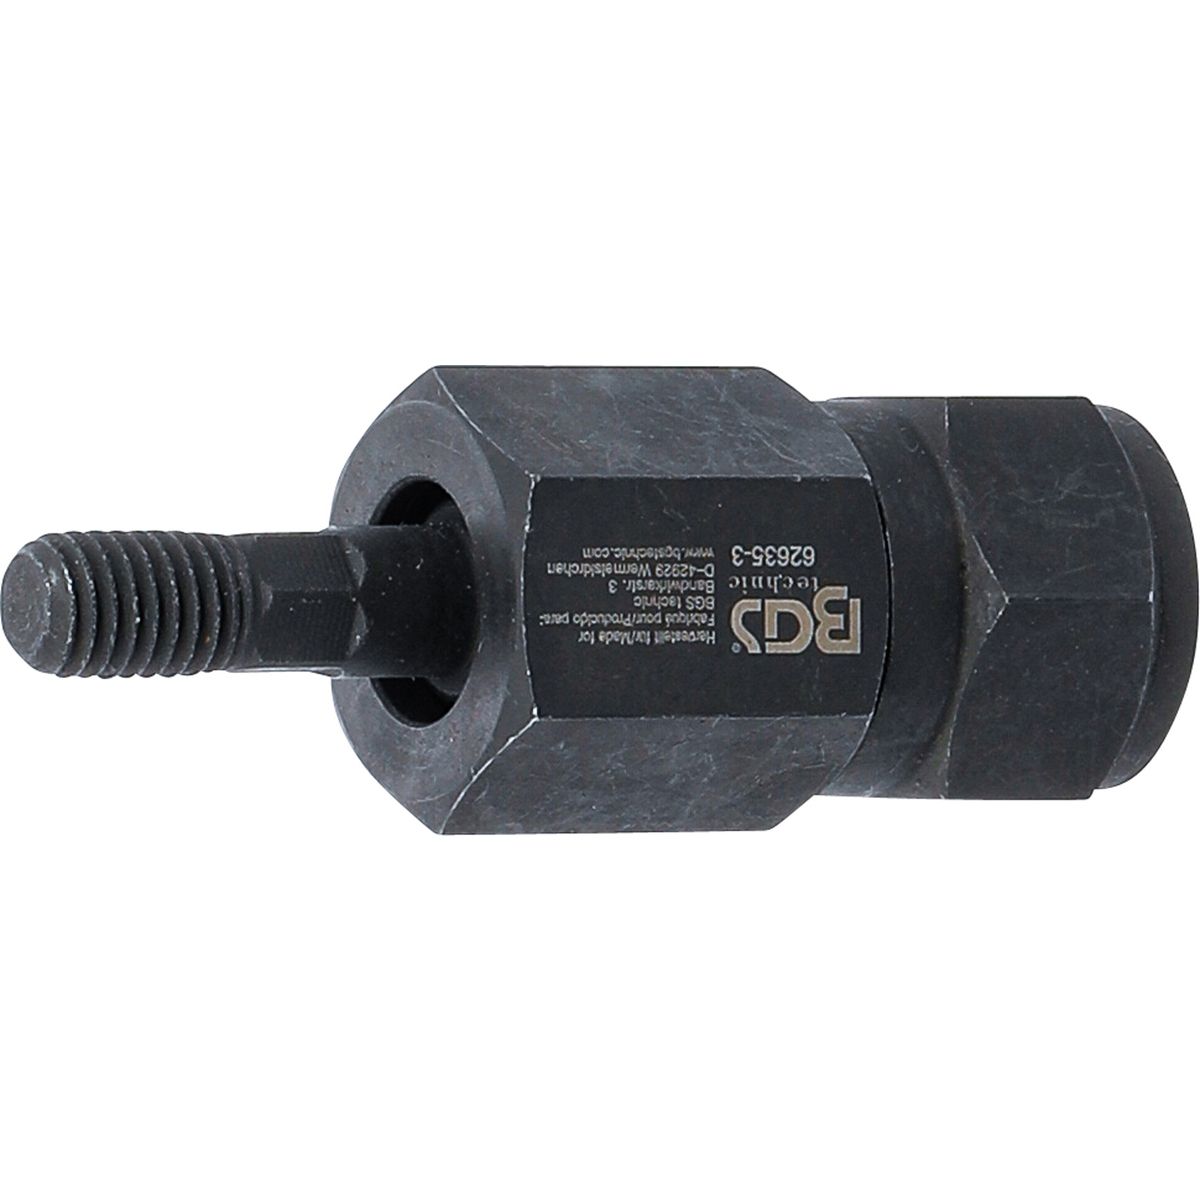 Ball Joint Adaptor | for BGS 62635 | M10 x M14